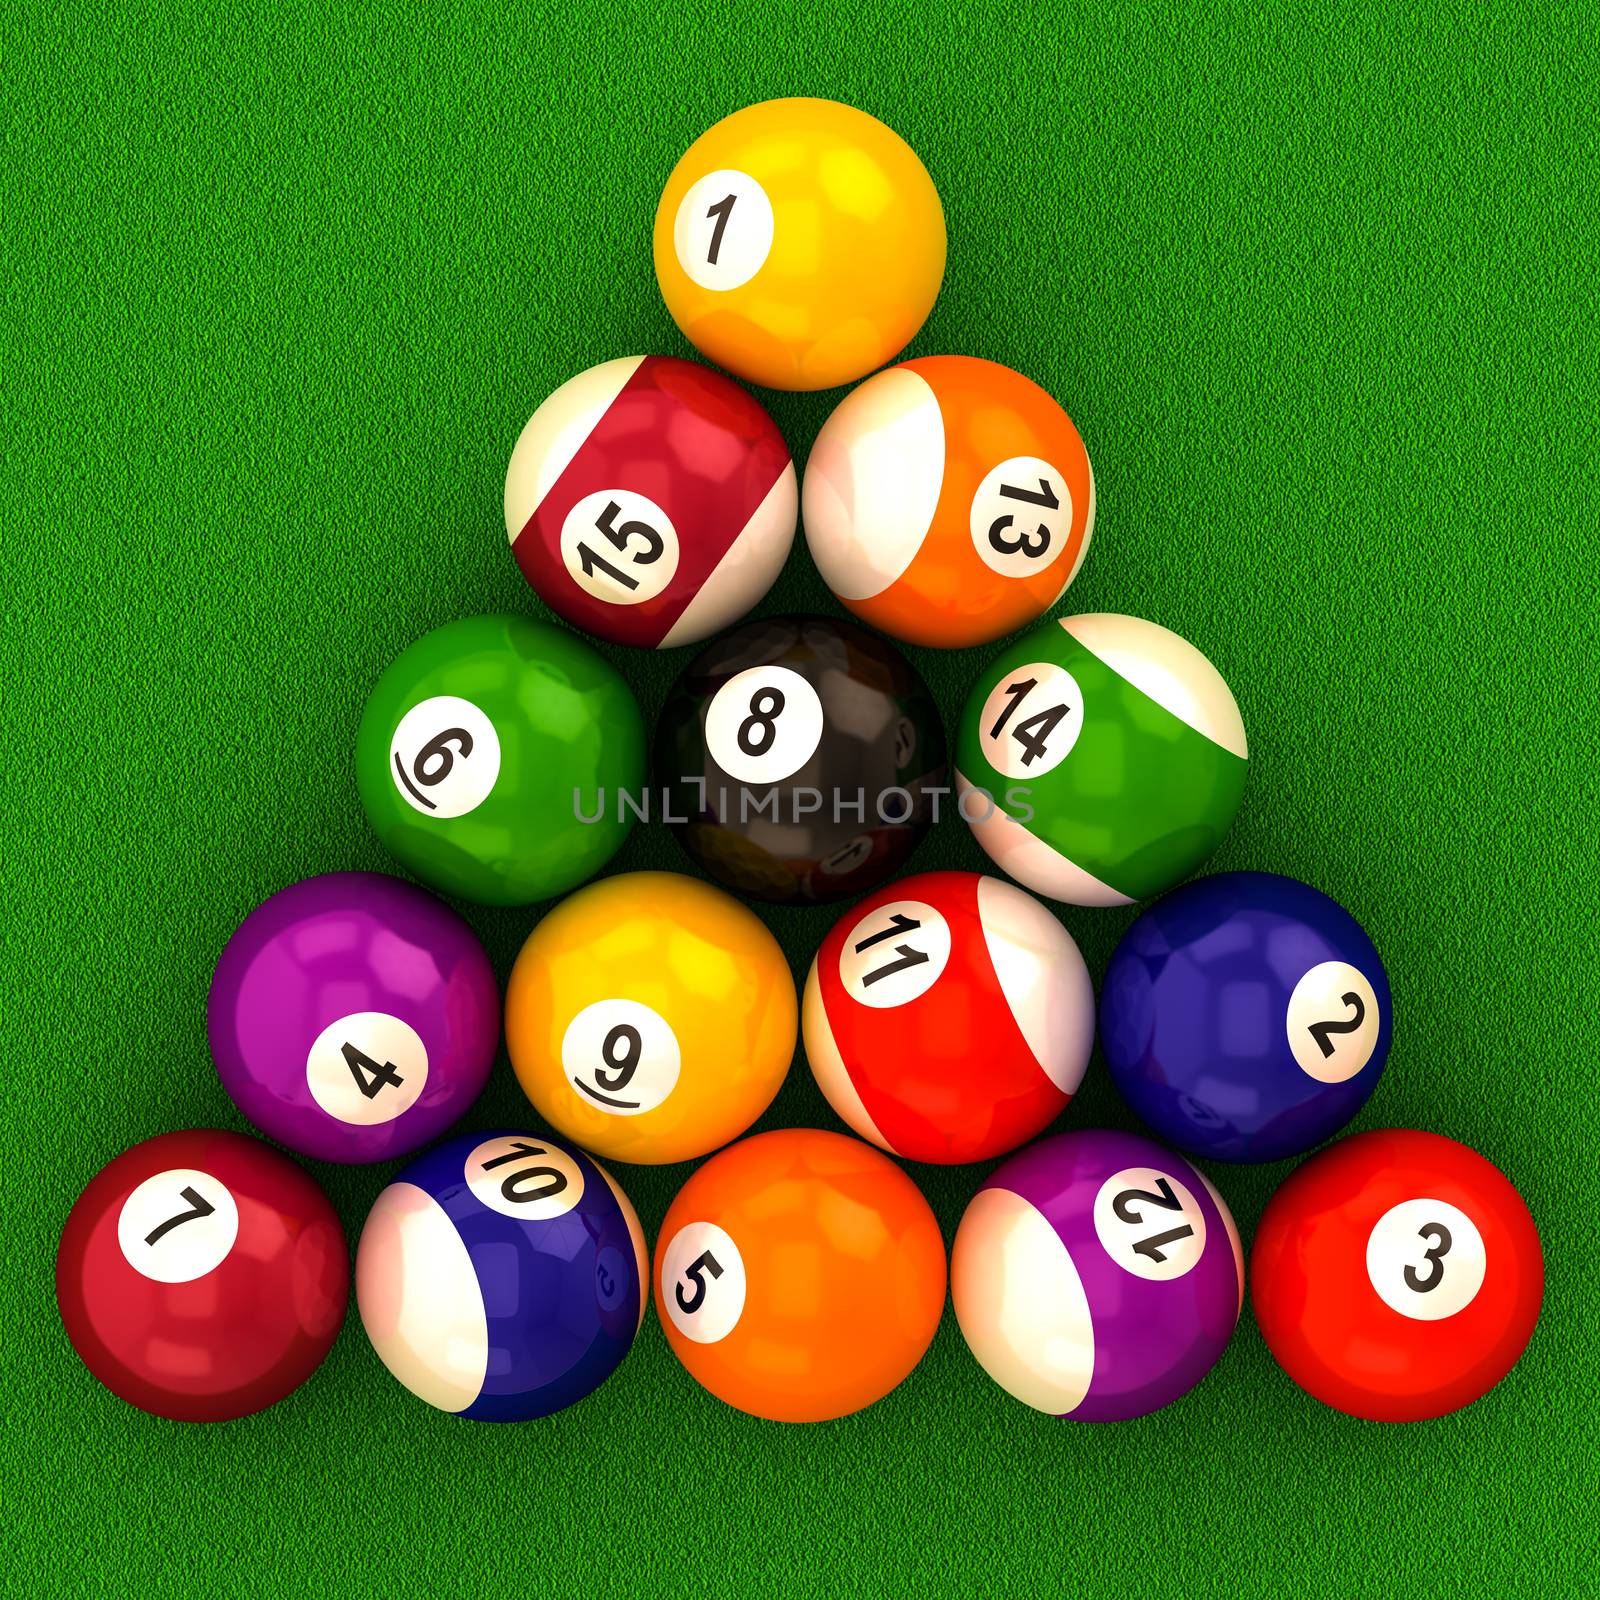 billiard  balls with numbers on a white background